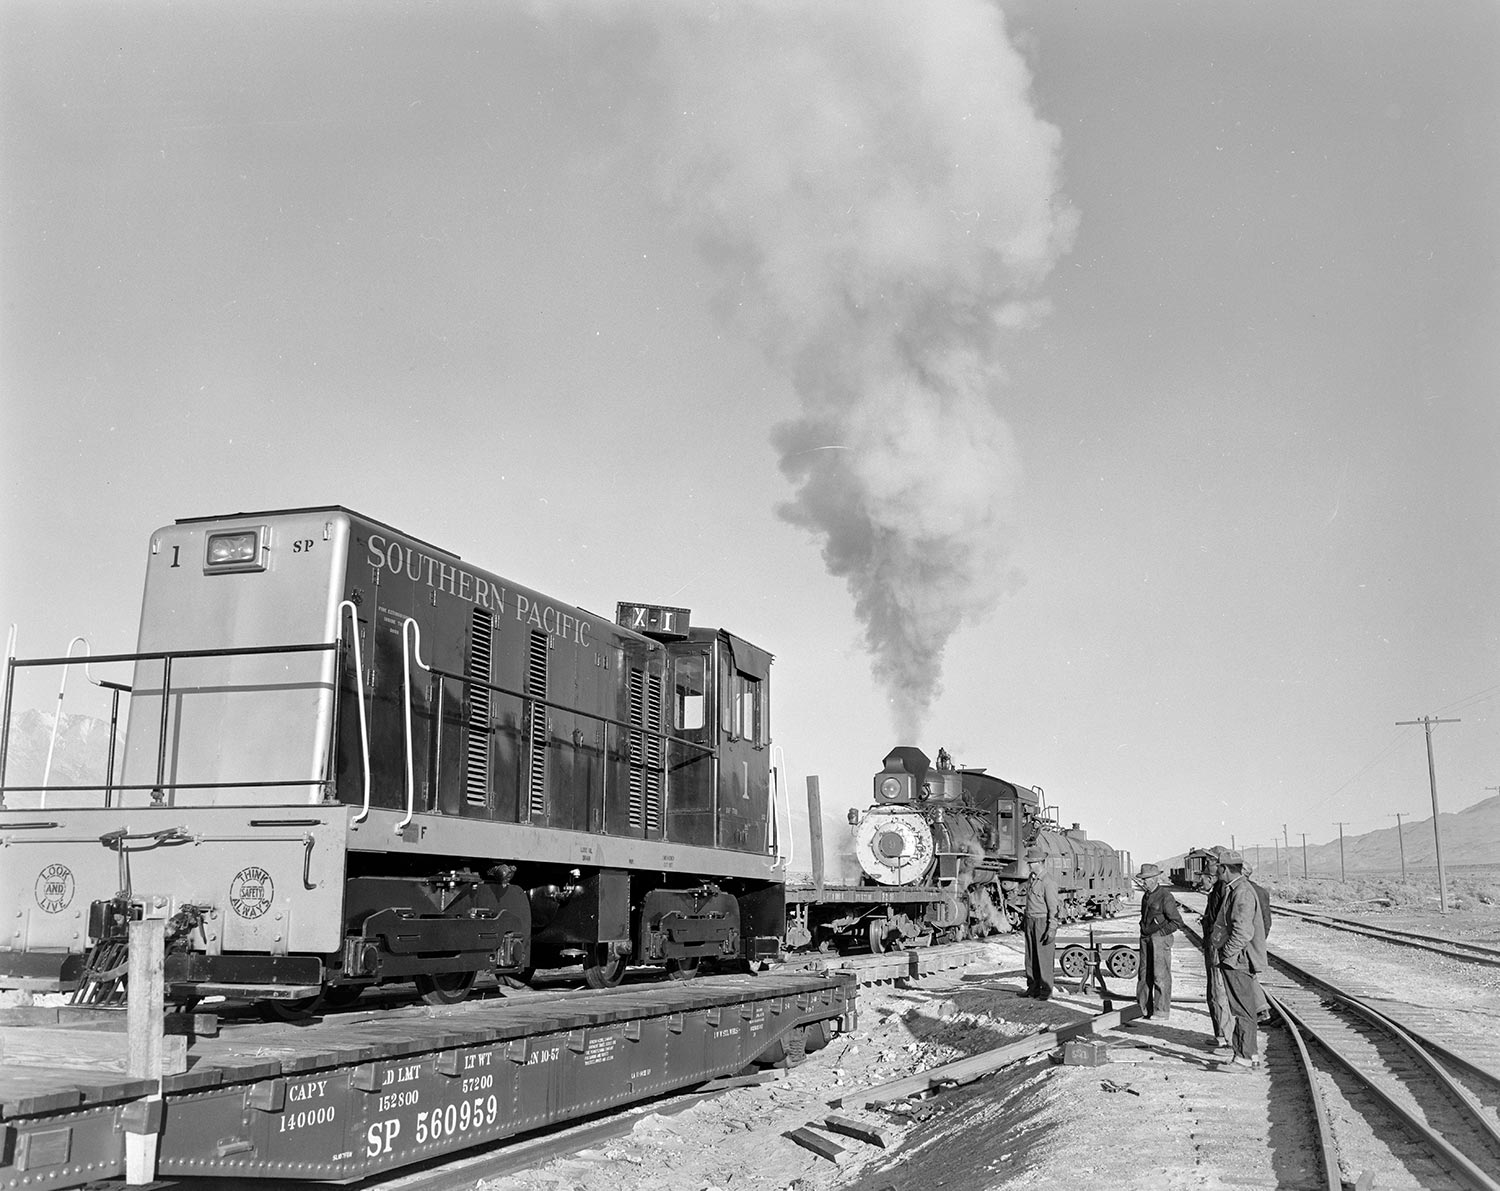 Southern Pacific train in Old Sacramento, a 28-acre National